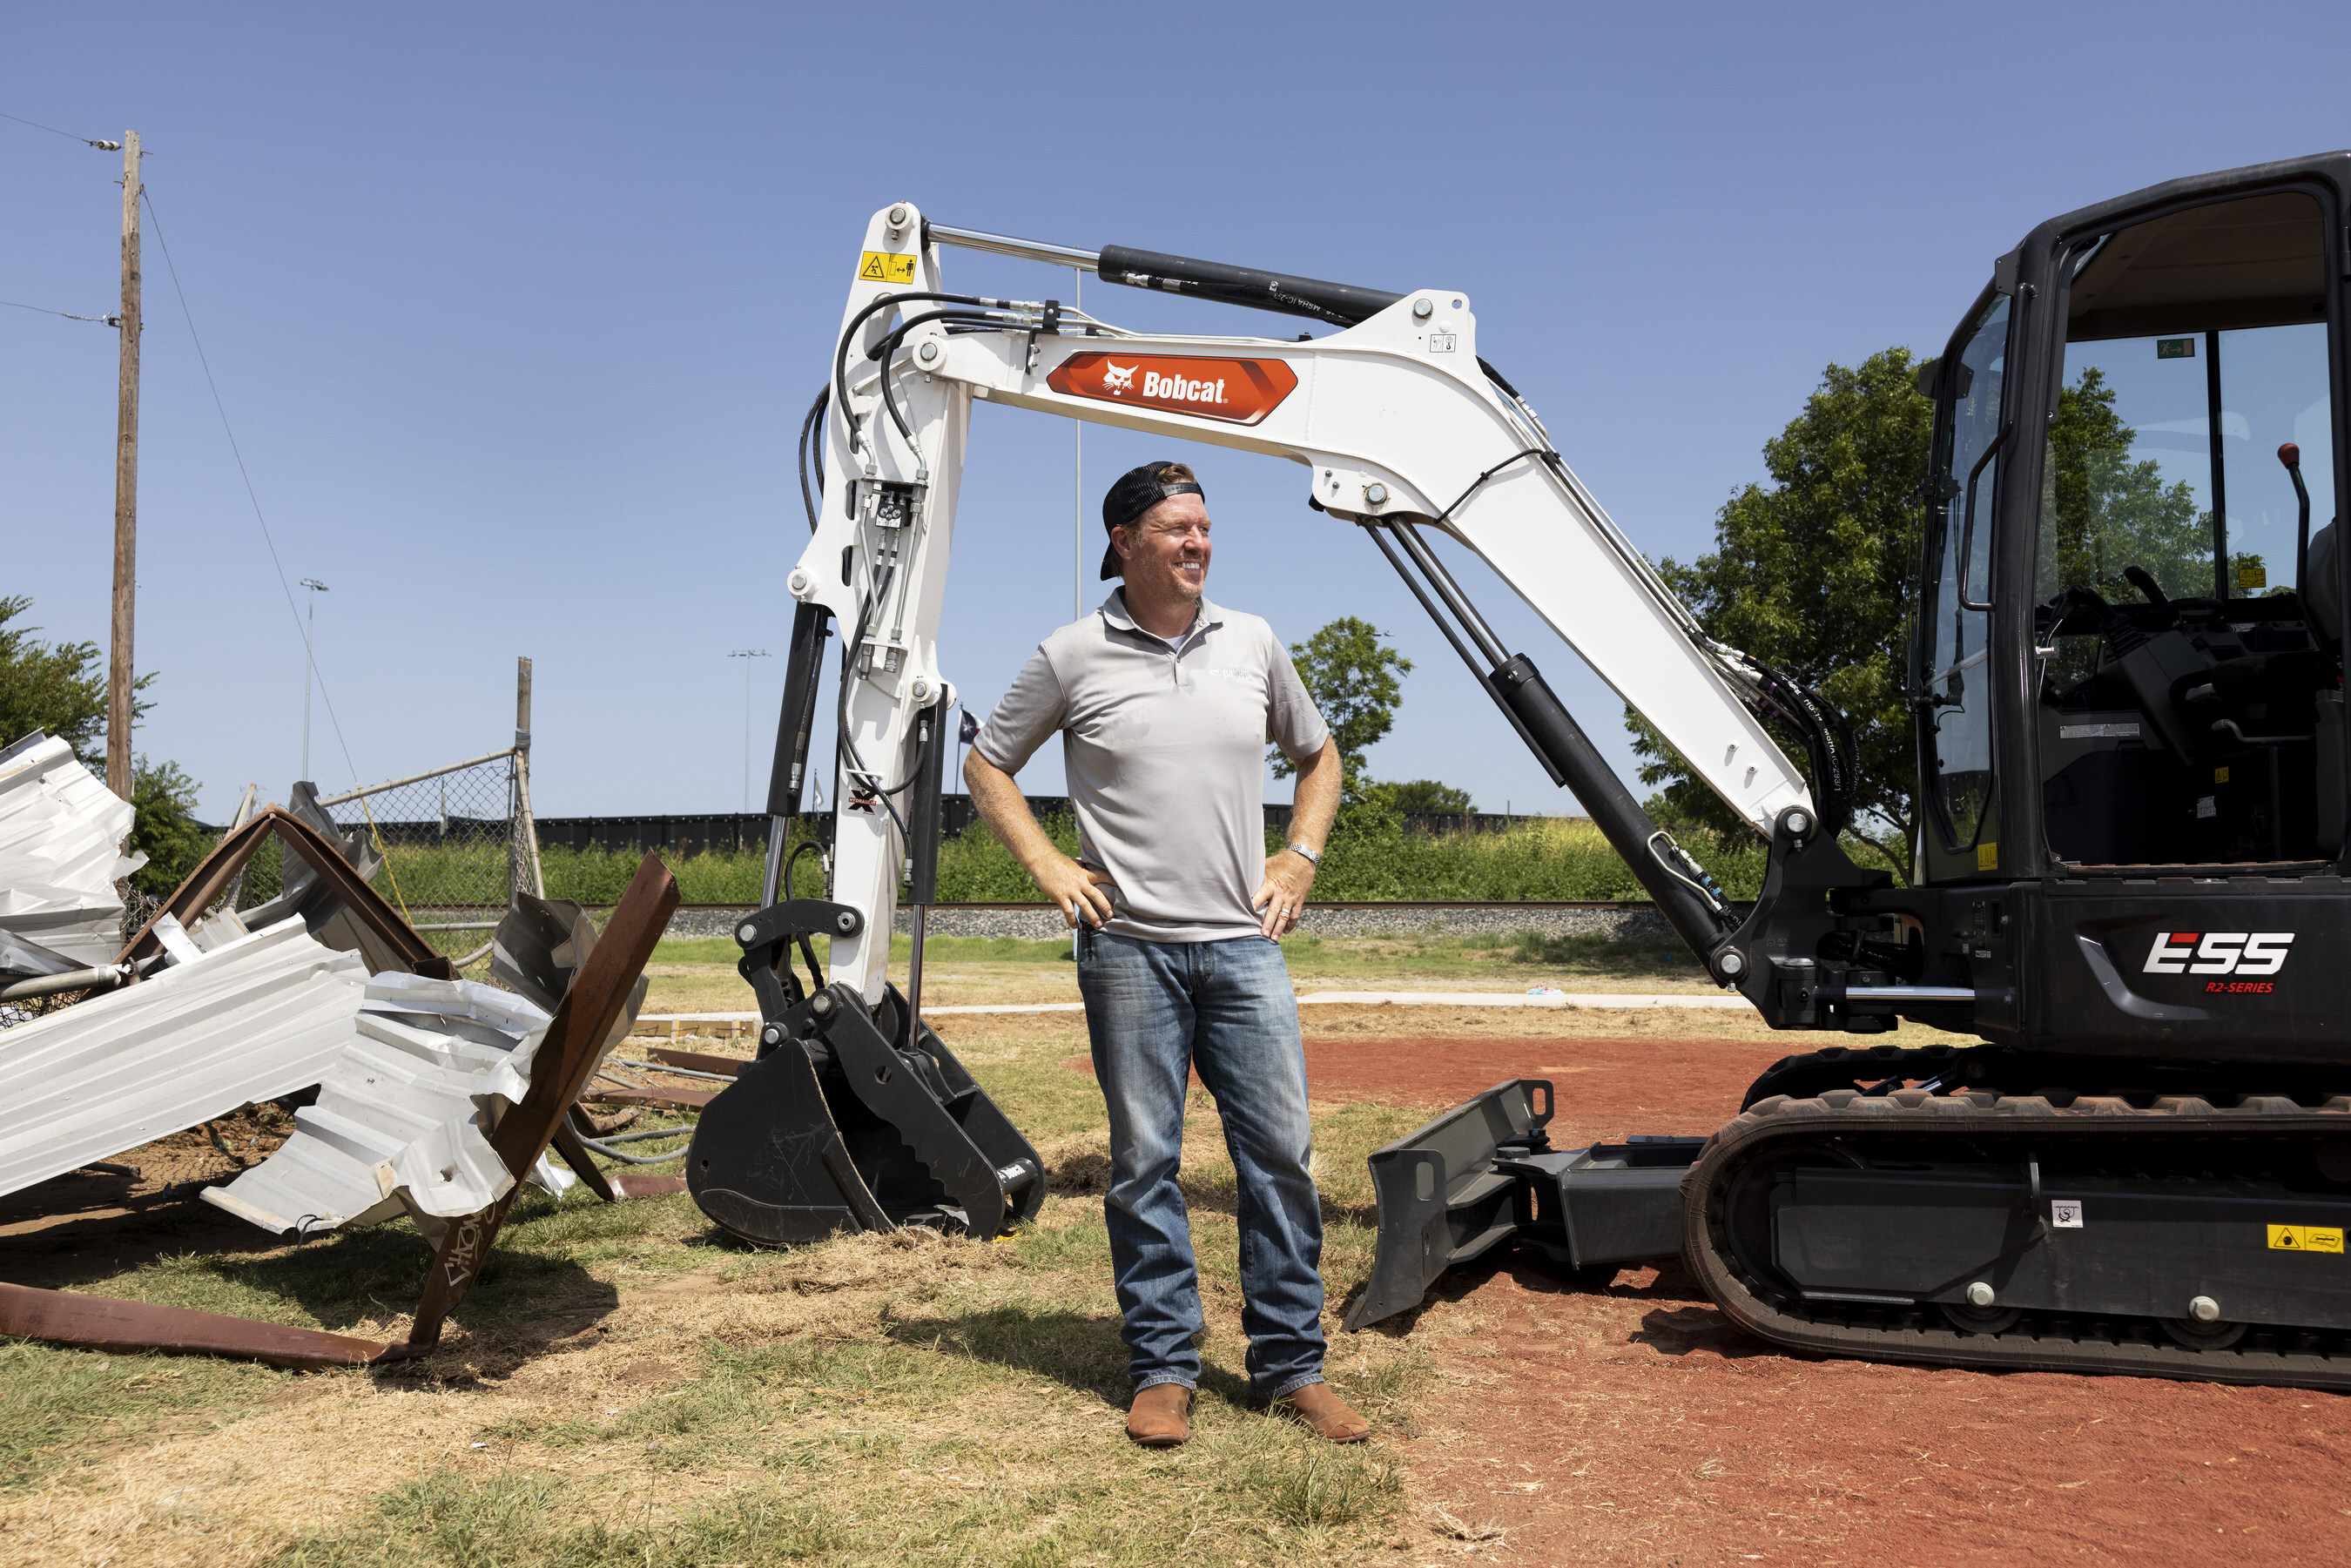 Chip Gaines and Bobcat Company partnered to renovate Bell’s Hill Park in Waco, TX as a kickoff to the Bobcat Park and Rec Makeover Contest. Photo by Jenn Ackerman